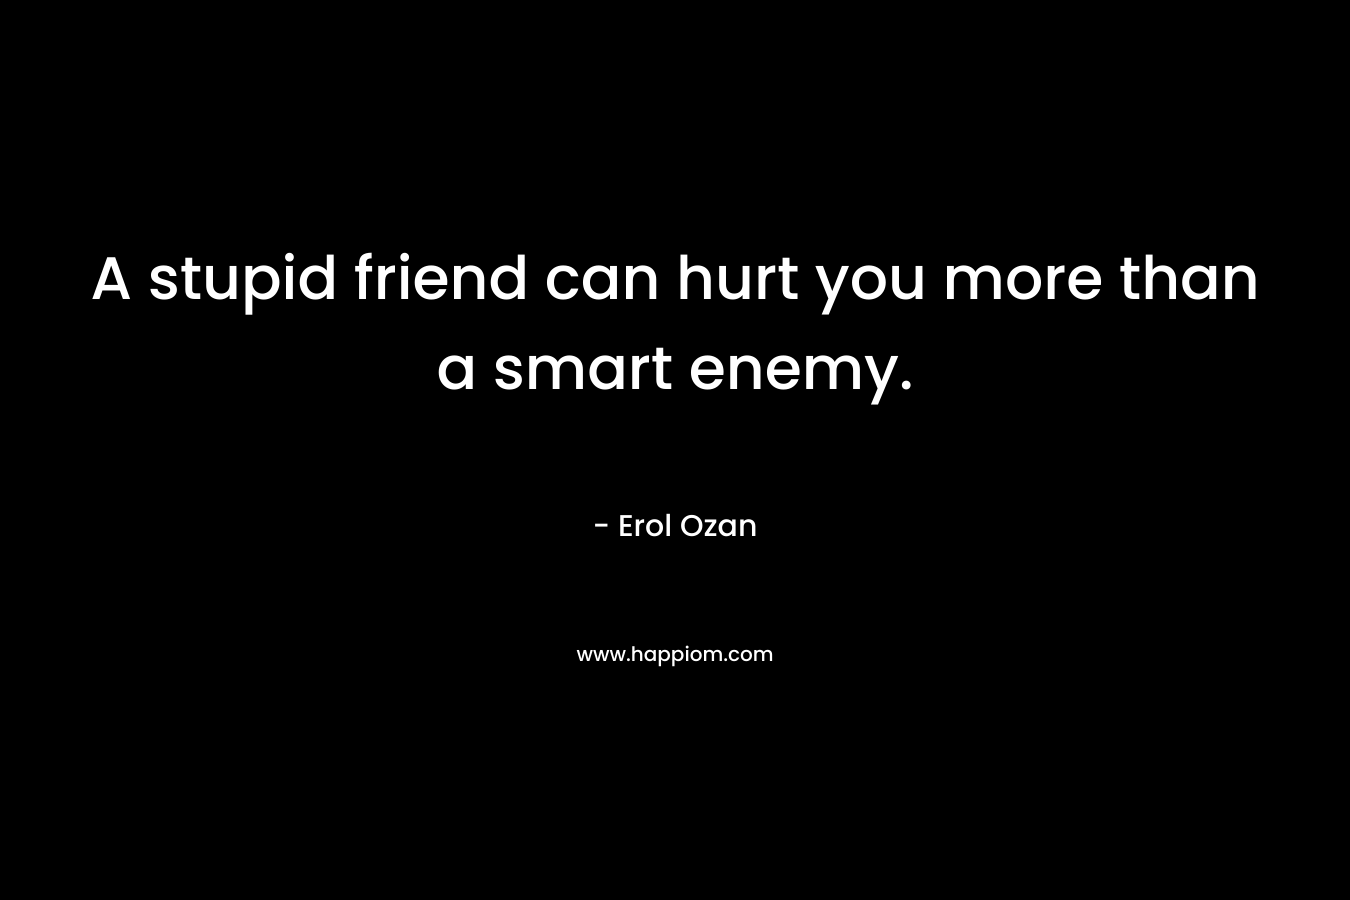 A stupid friend can hurt you more than a smart enemy. – Erol Ozan